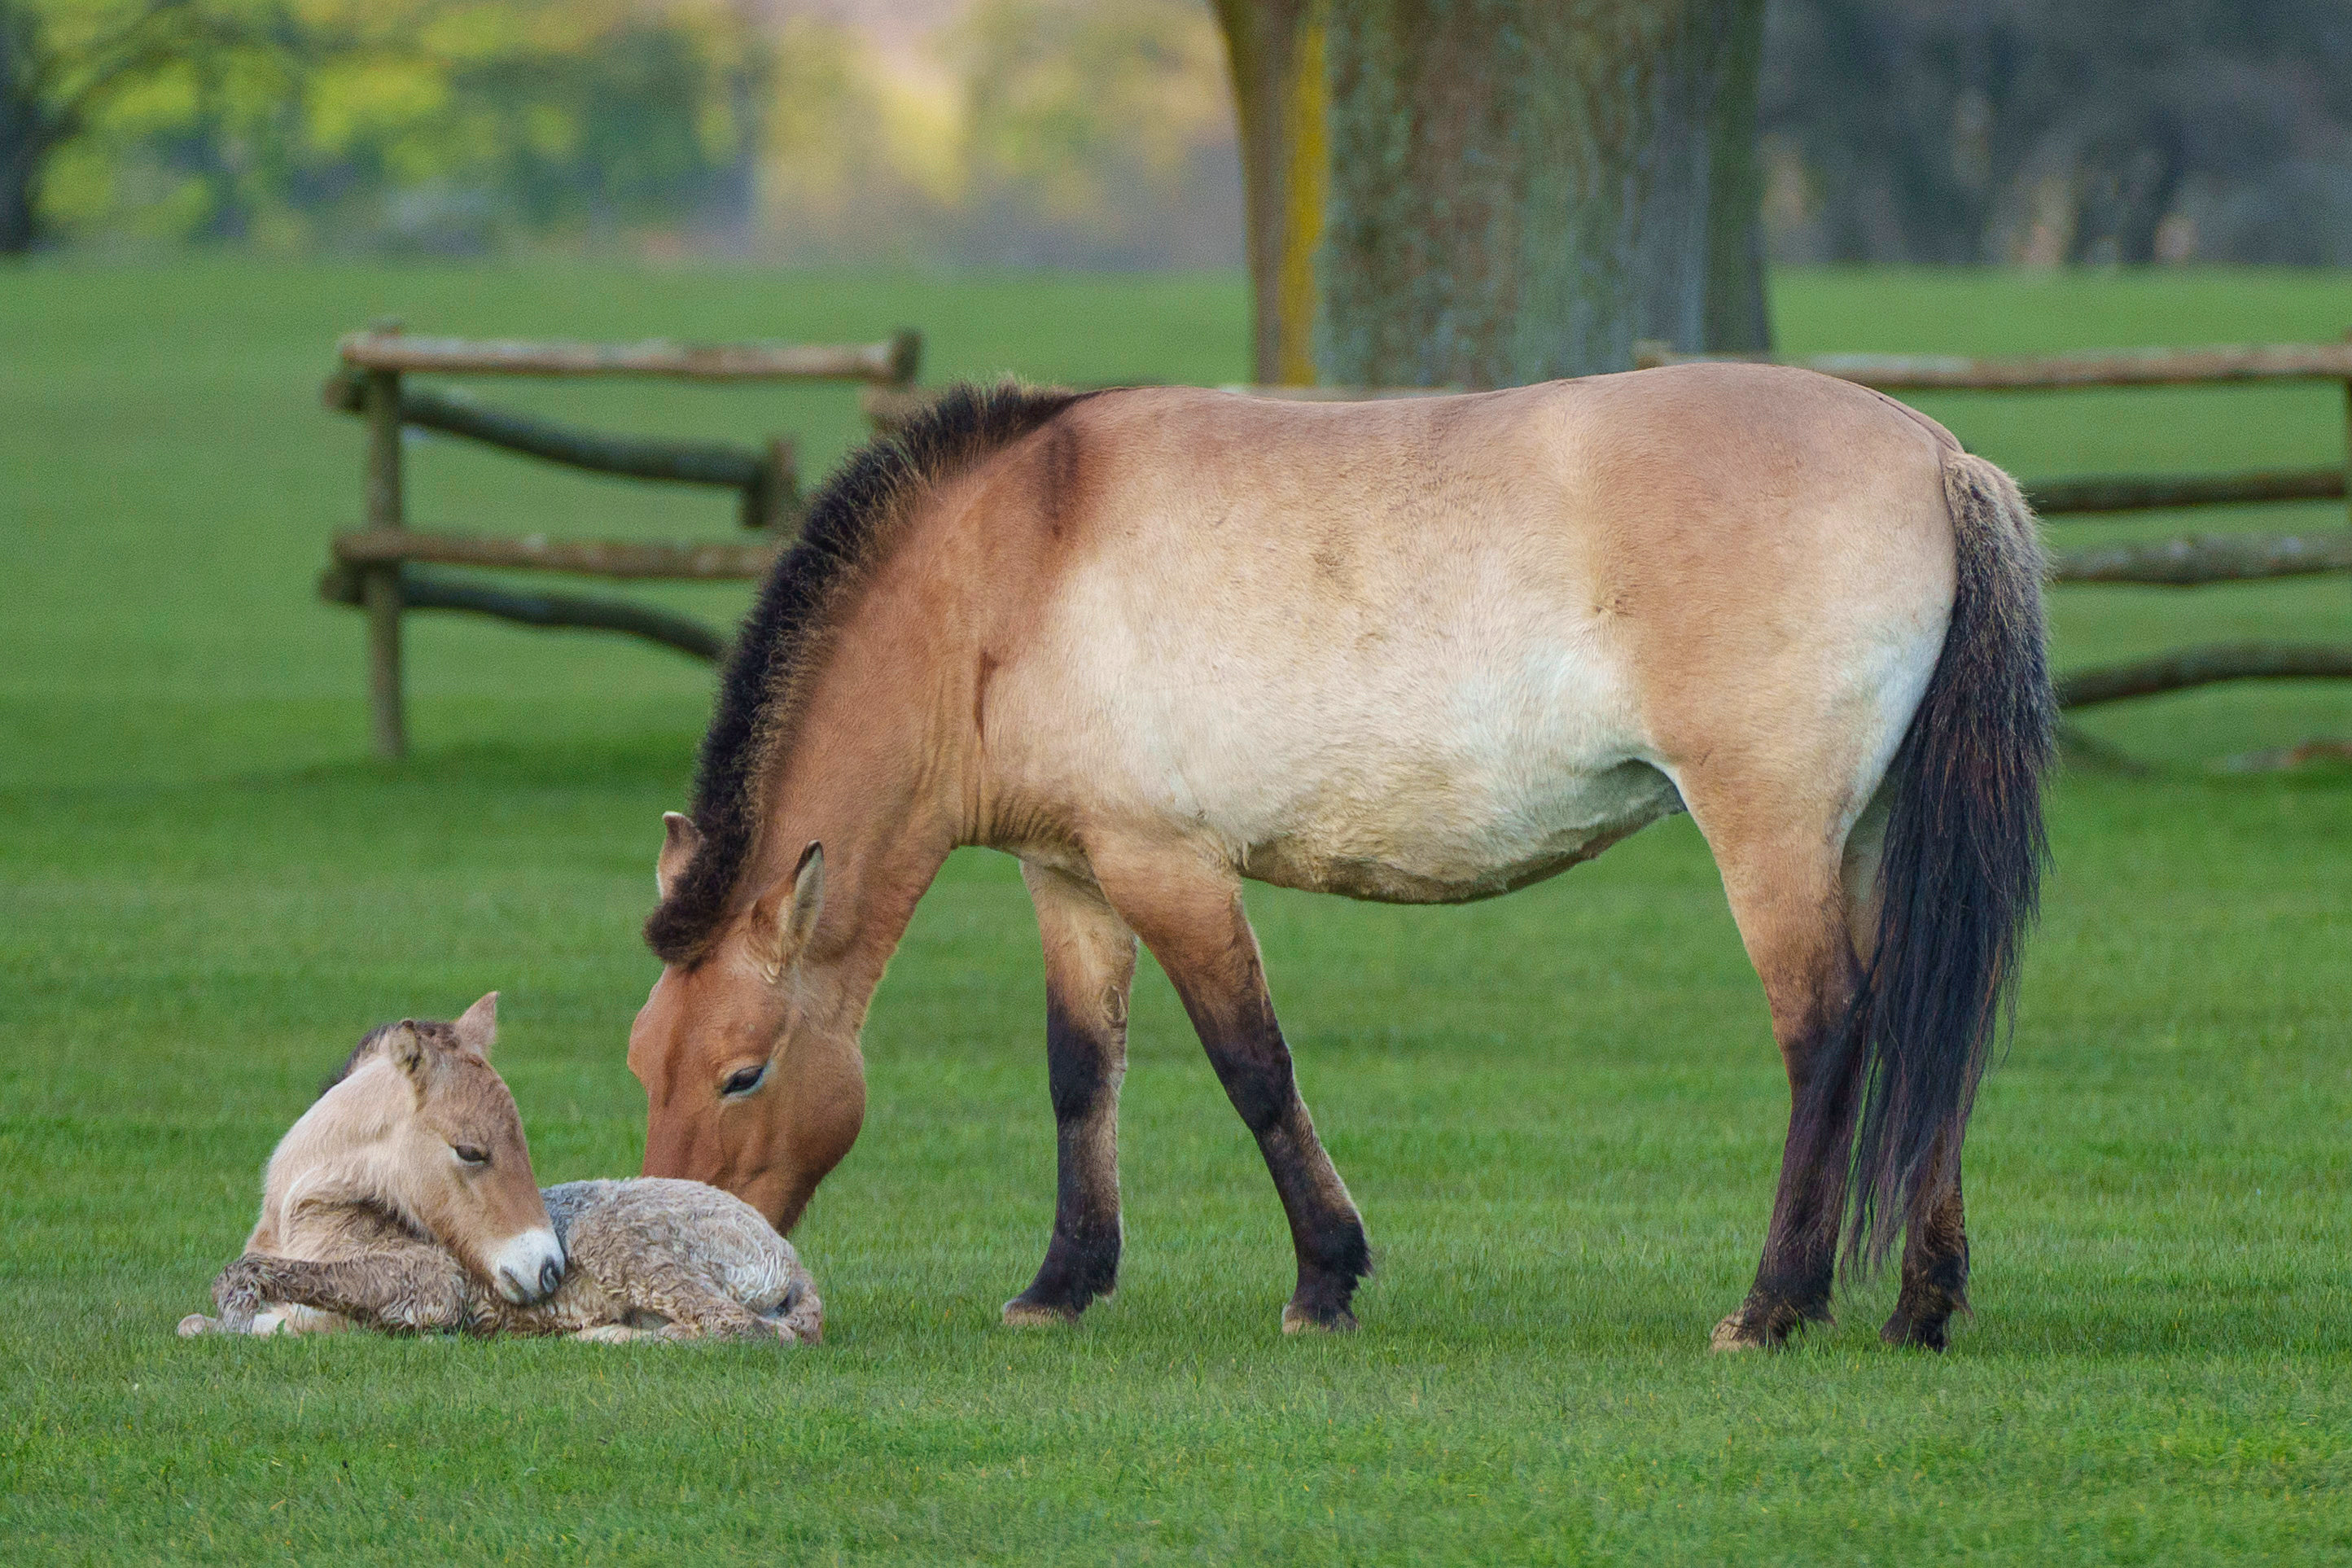 Foal rolling around on the grass